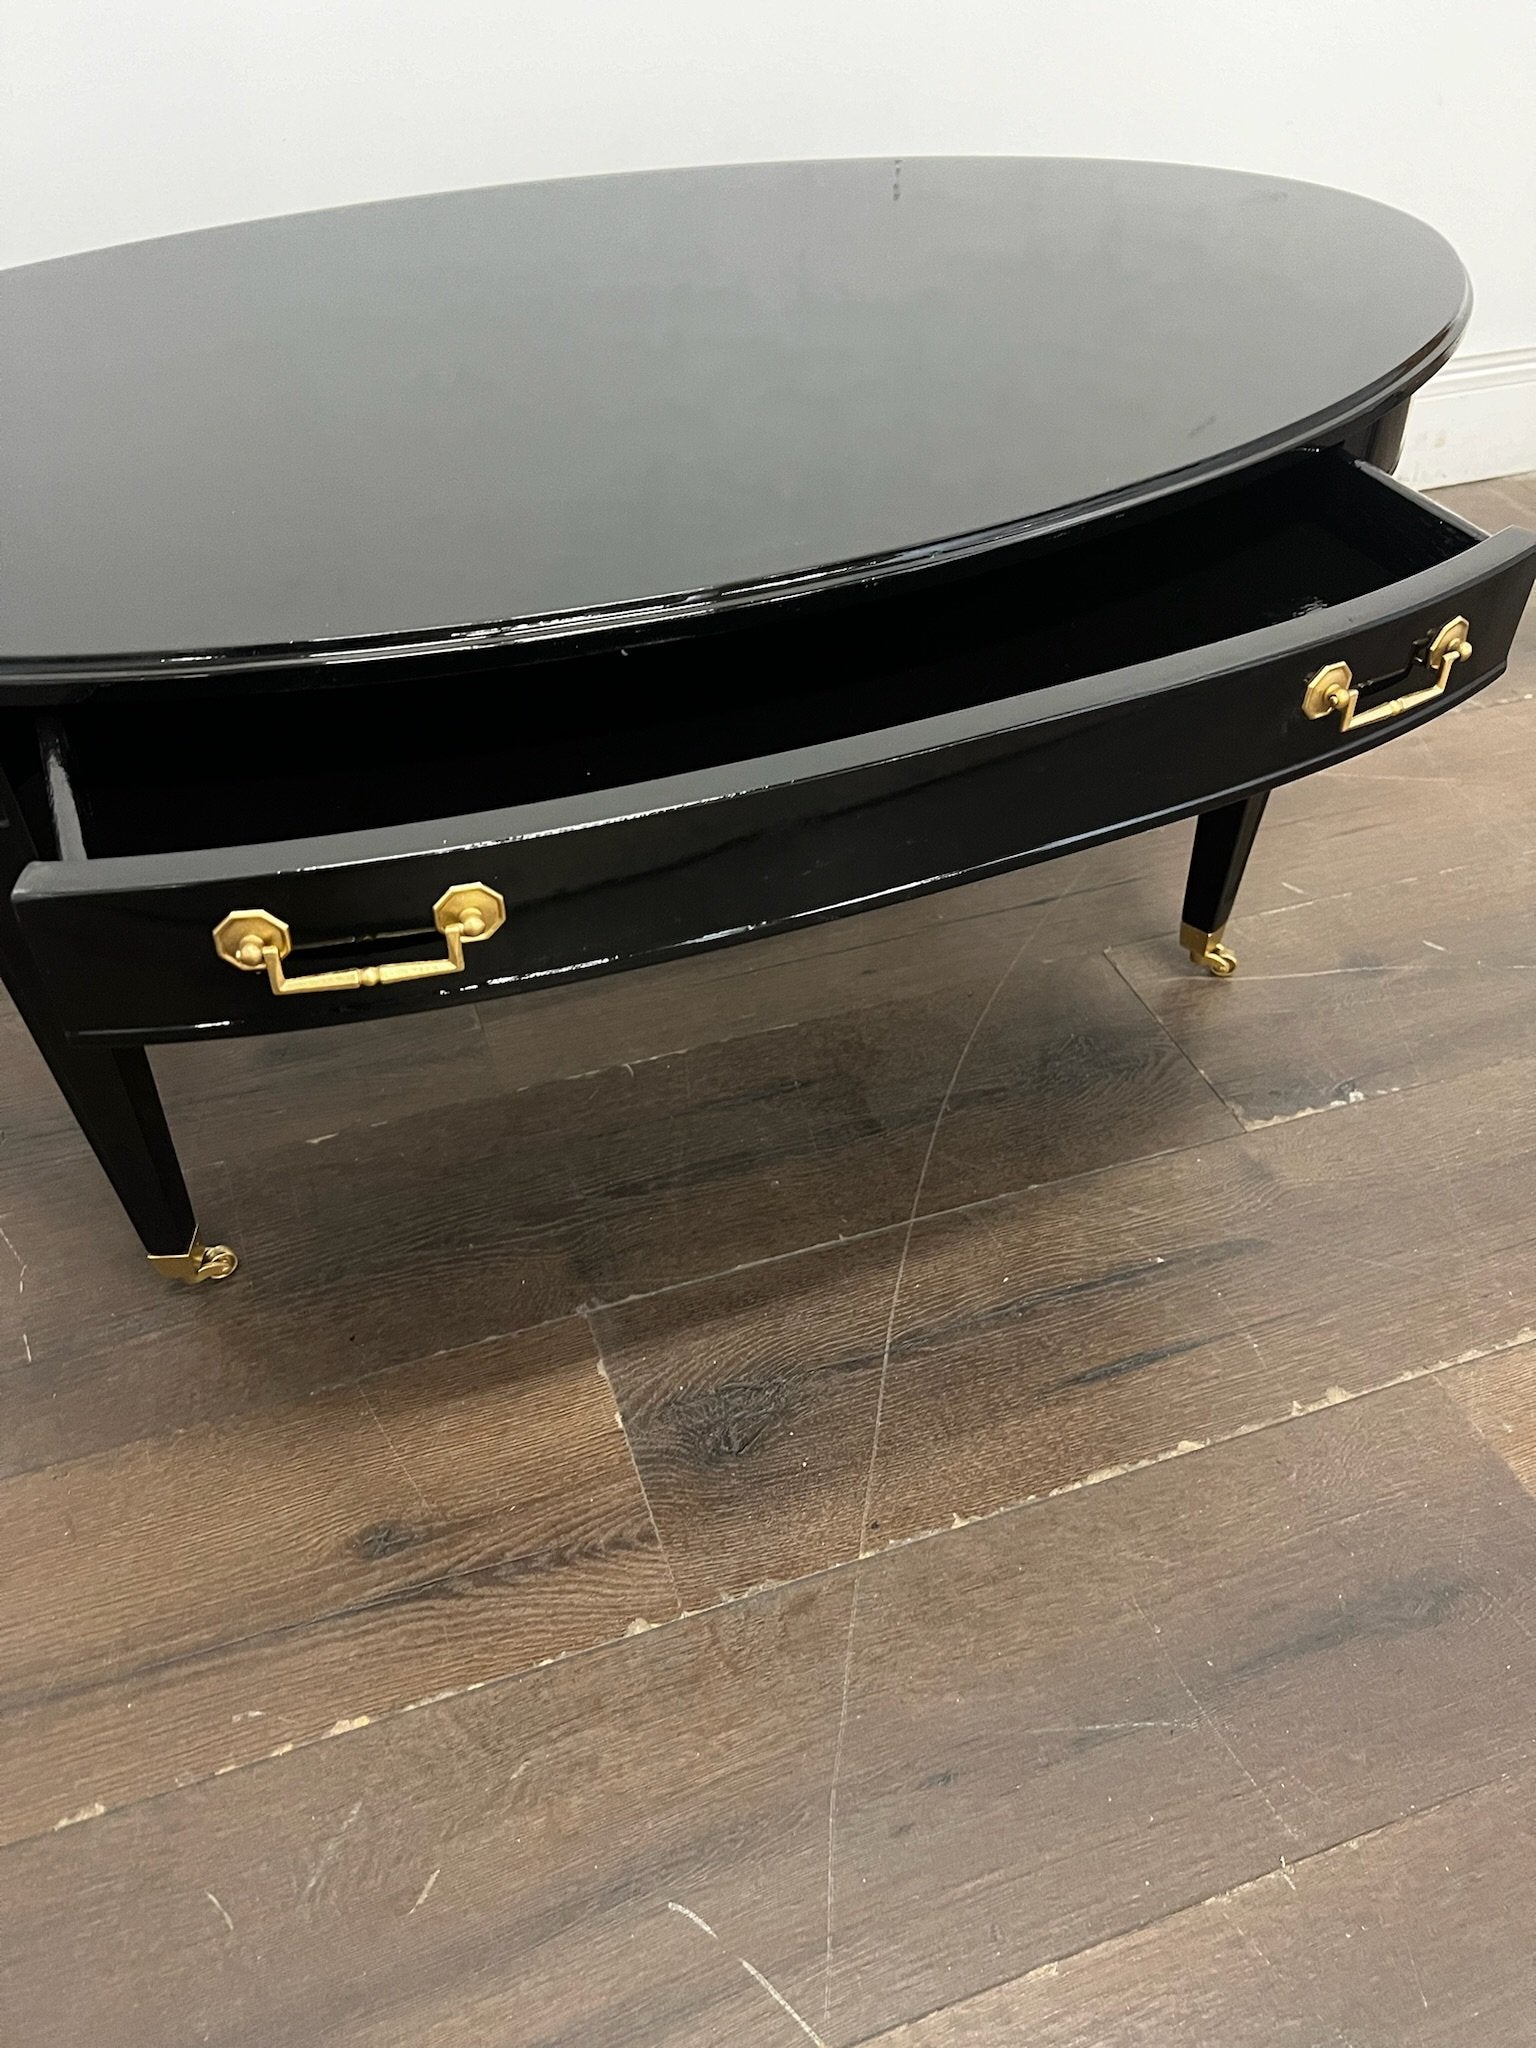 AVAILABLE: Black Benjamin Moore Coffee Table